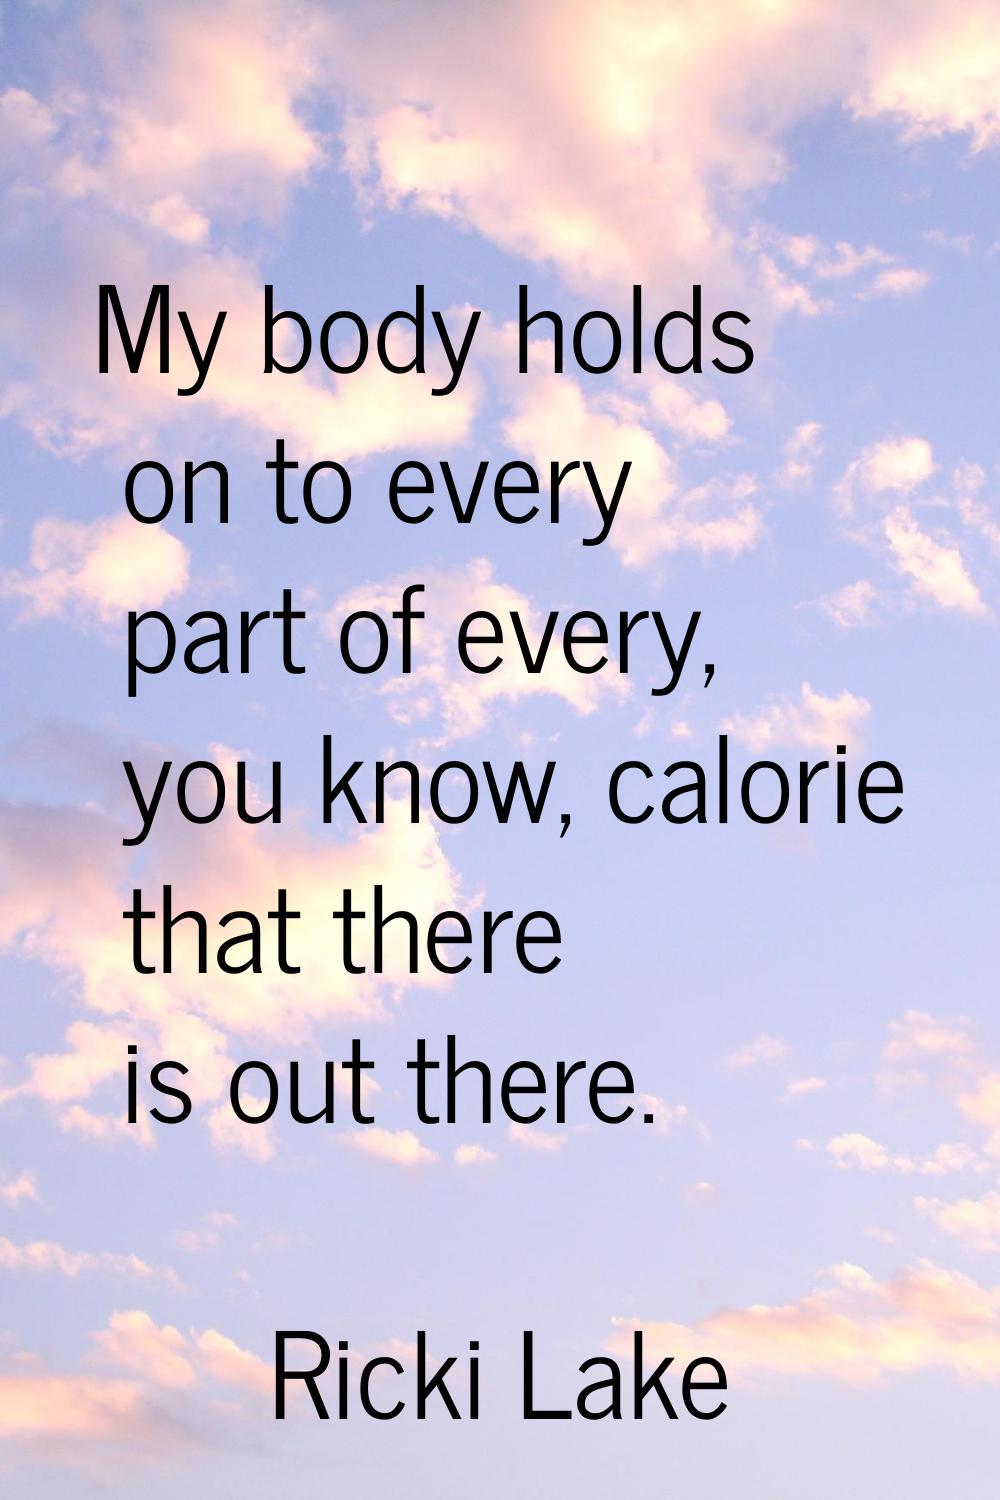 My body holds on to every part of every, you know, calorie that there is out there.